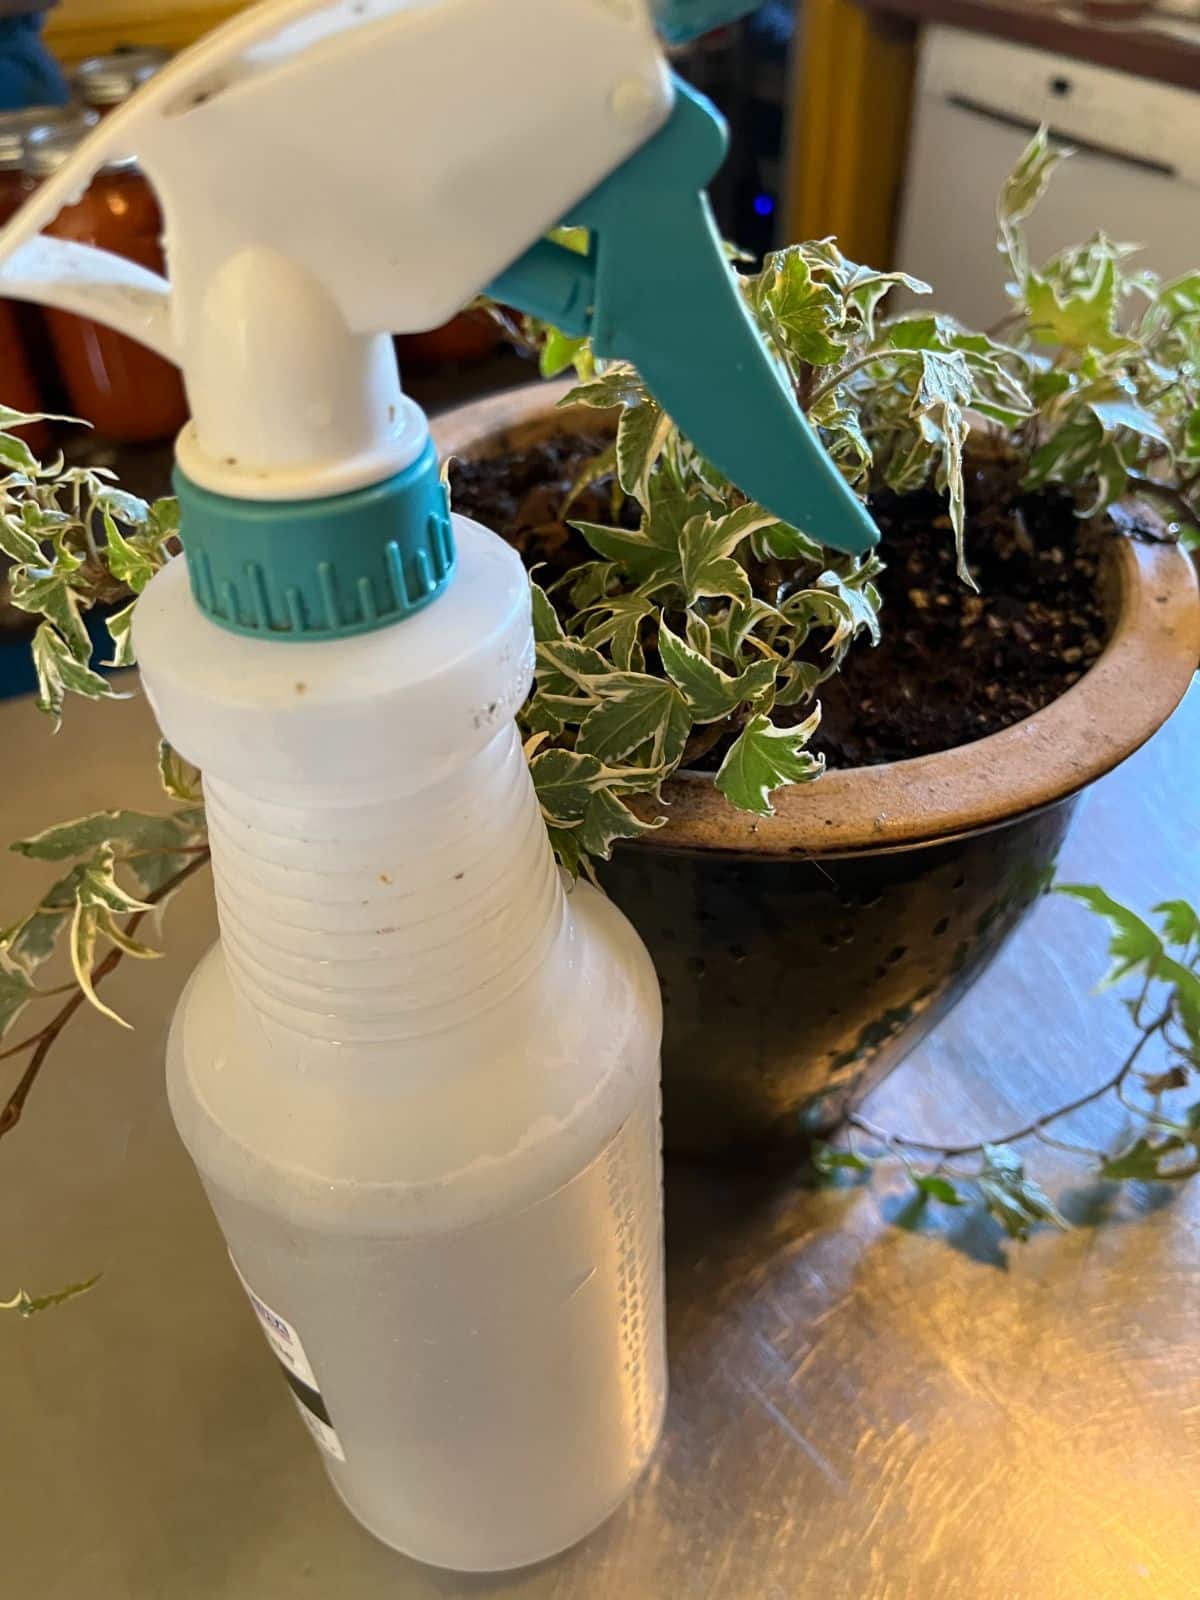 A potted plant being treated with a homemade aphid and soil gnat spray